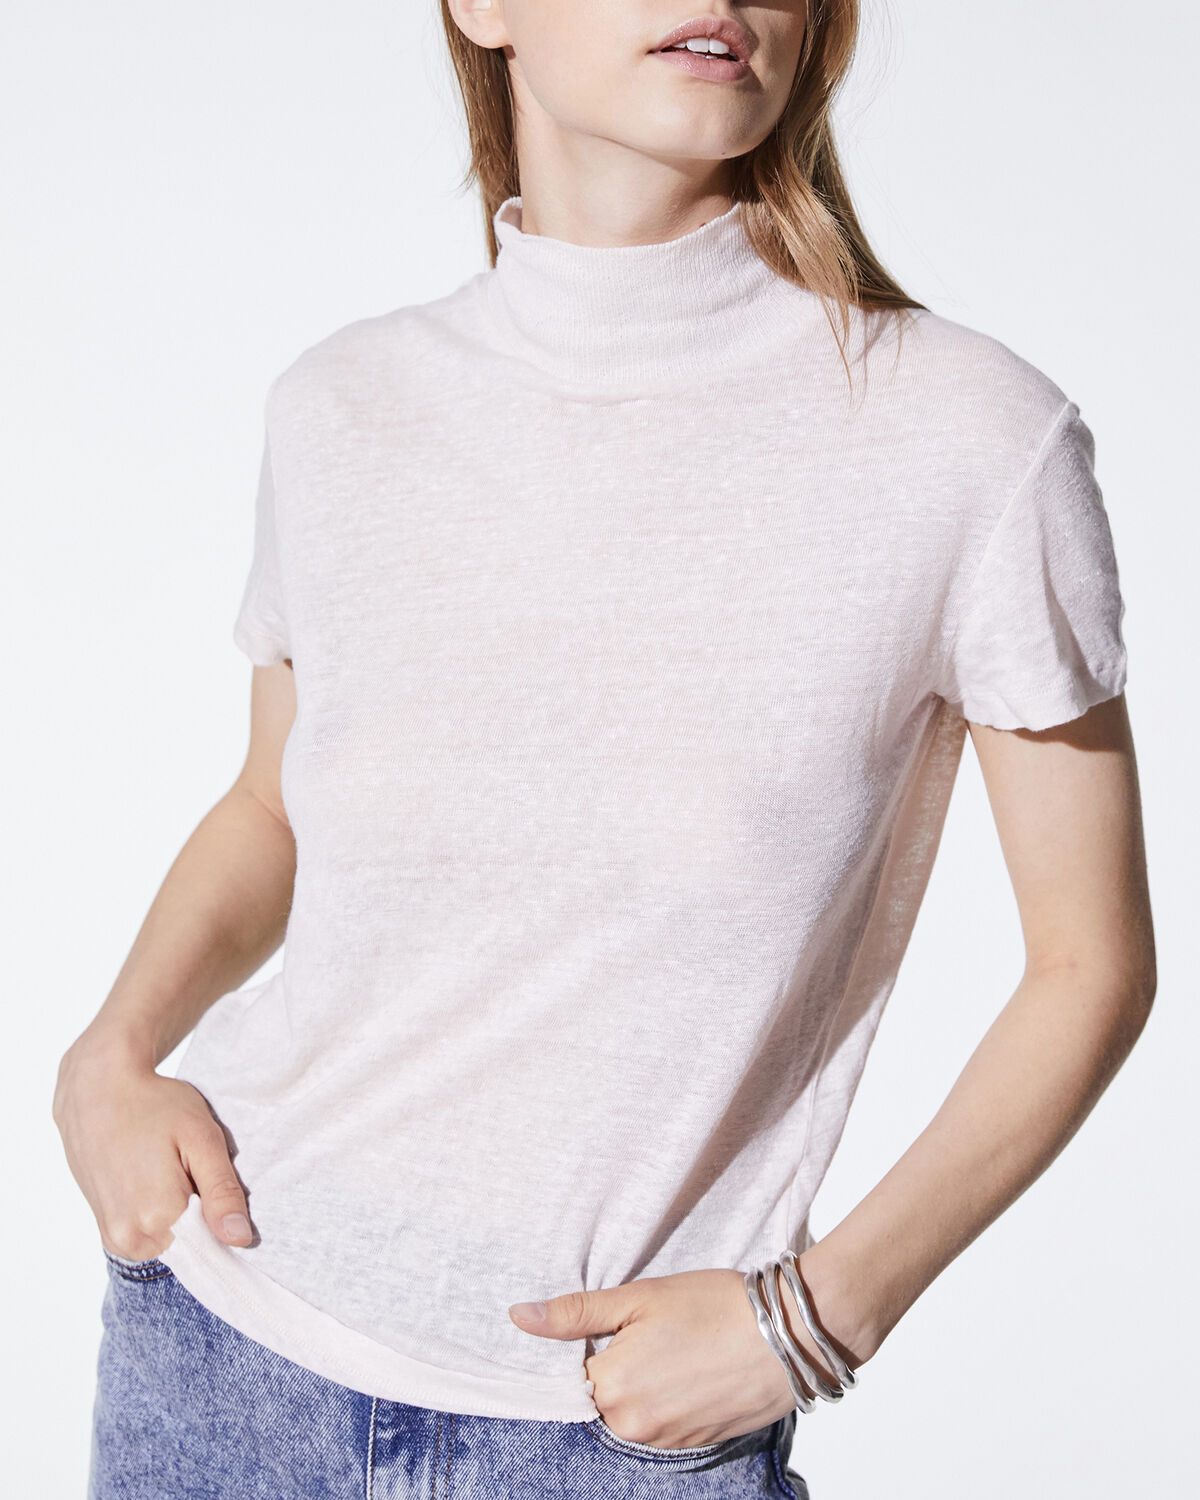 Photo of IRO Paris Wake T-Shirt Near White - This Slightly Transparent Linen T-shirt Is A Basic Piece Of The Iro Collection, Easy To Wear By All Seasons. it Is Distinguished By Its Stand-up Collar That Will Give You An Elegant Headwear. Fall Winter 19